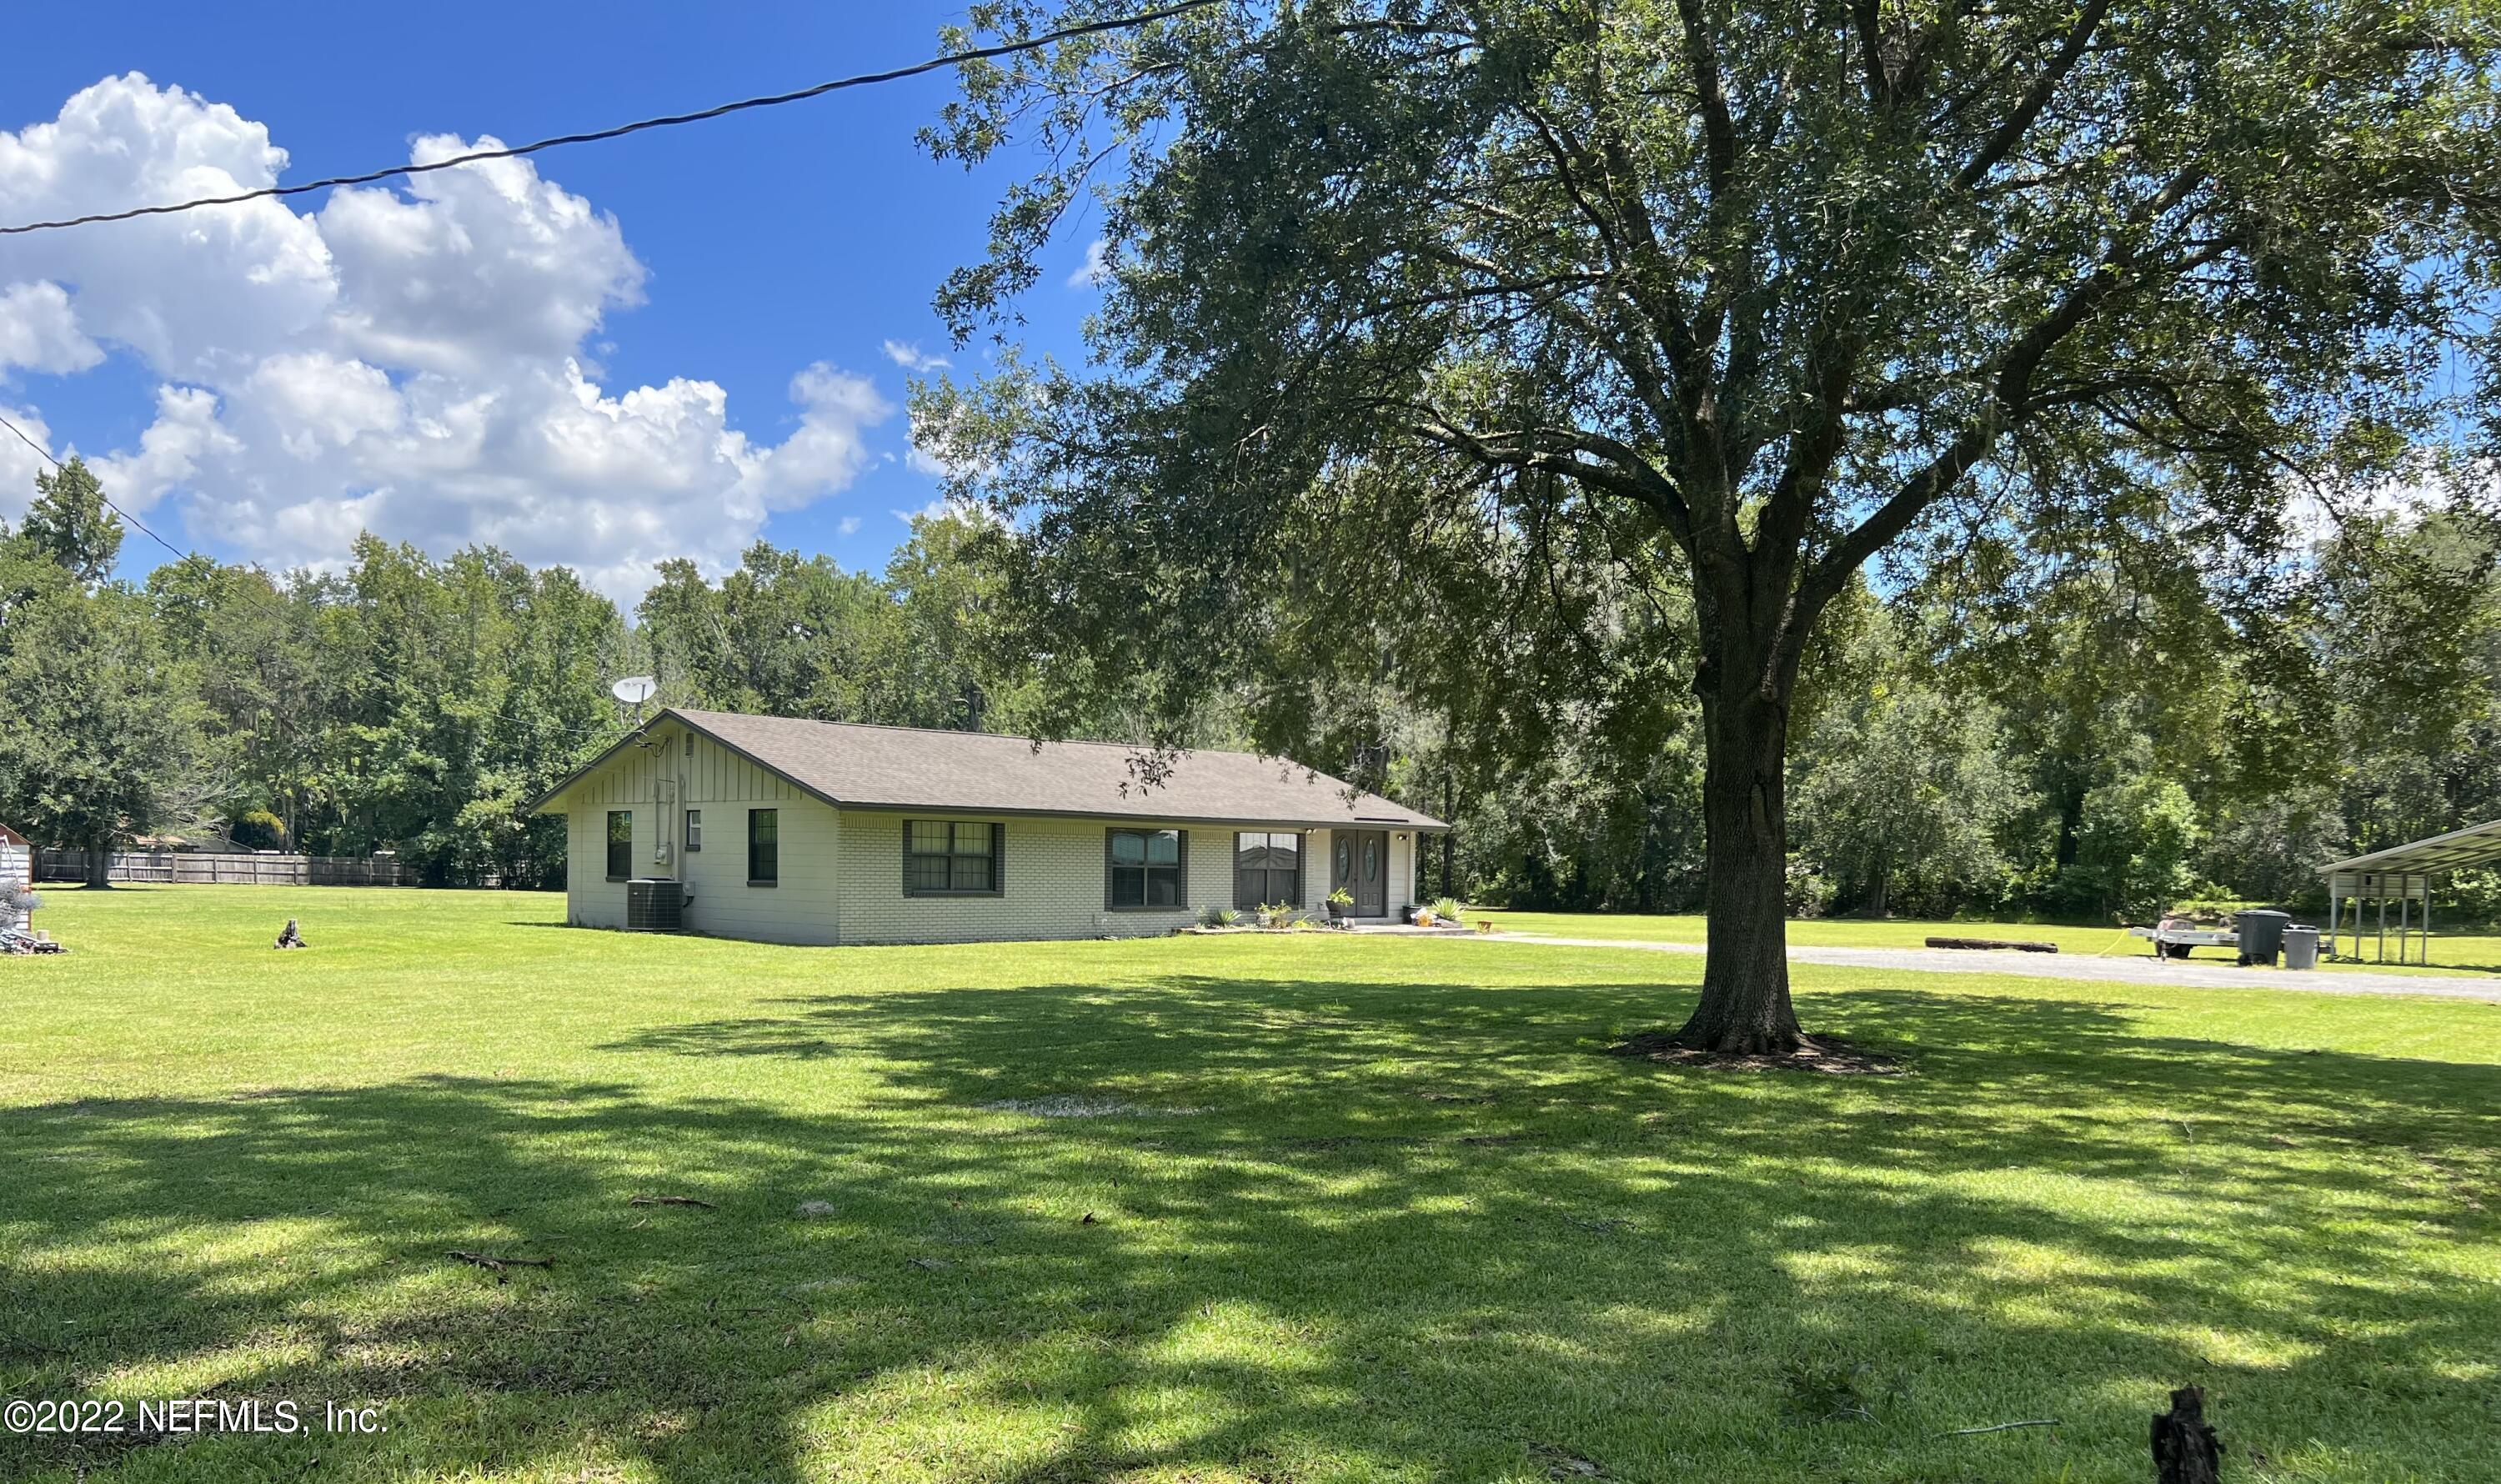 Middleburg, FL home for sale located at 1711 BAYVIEW Lane, Middleburg, FL 32068